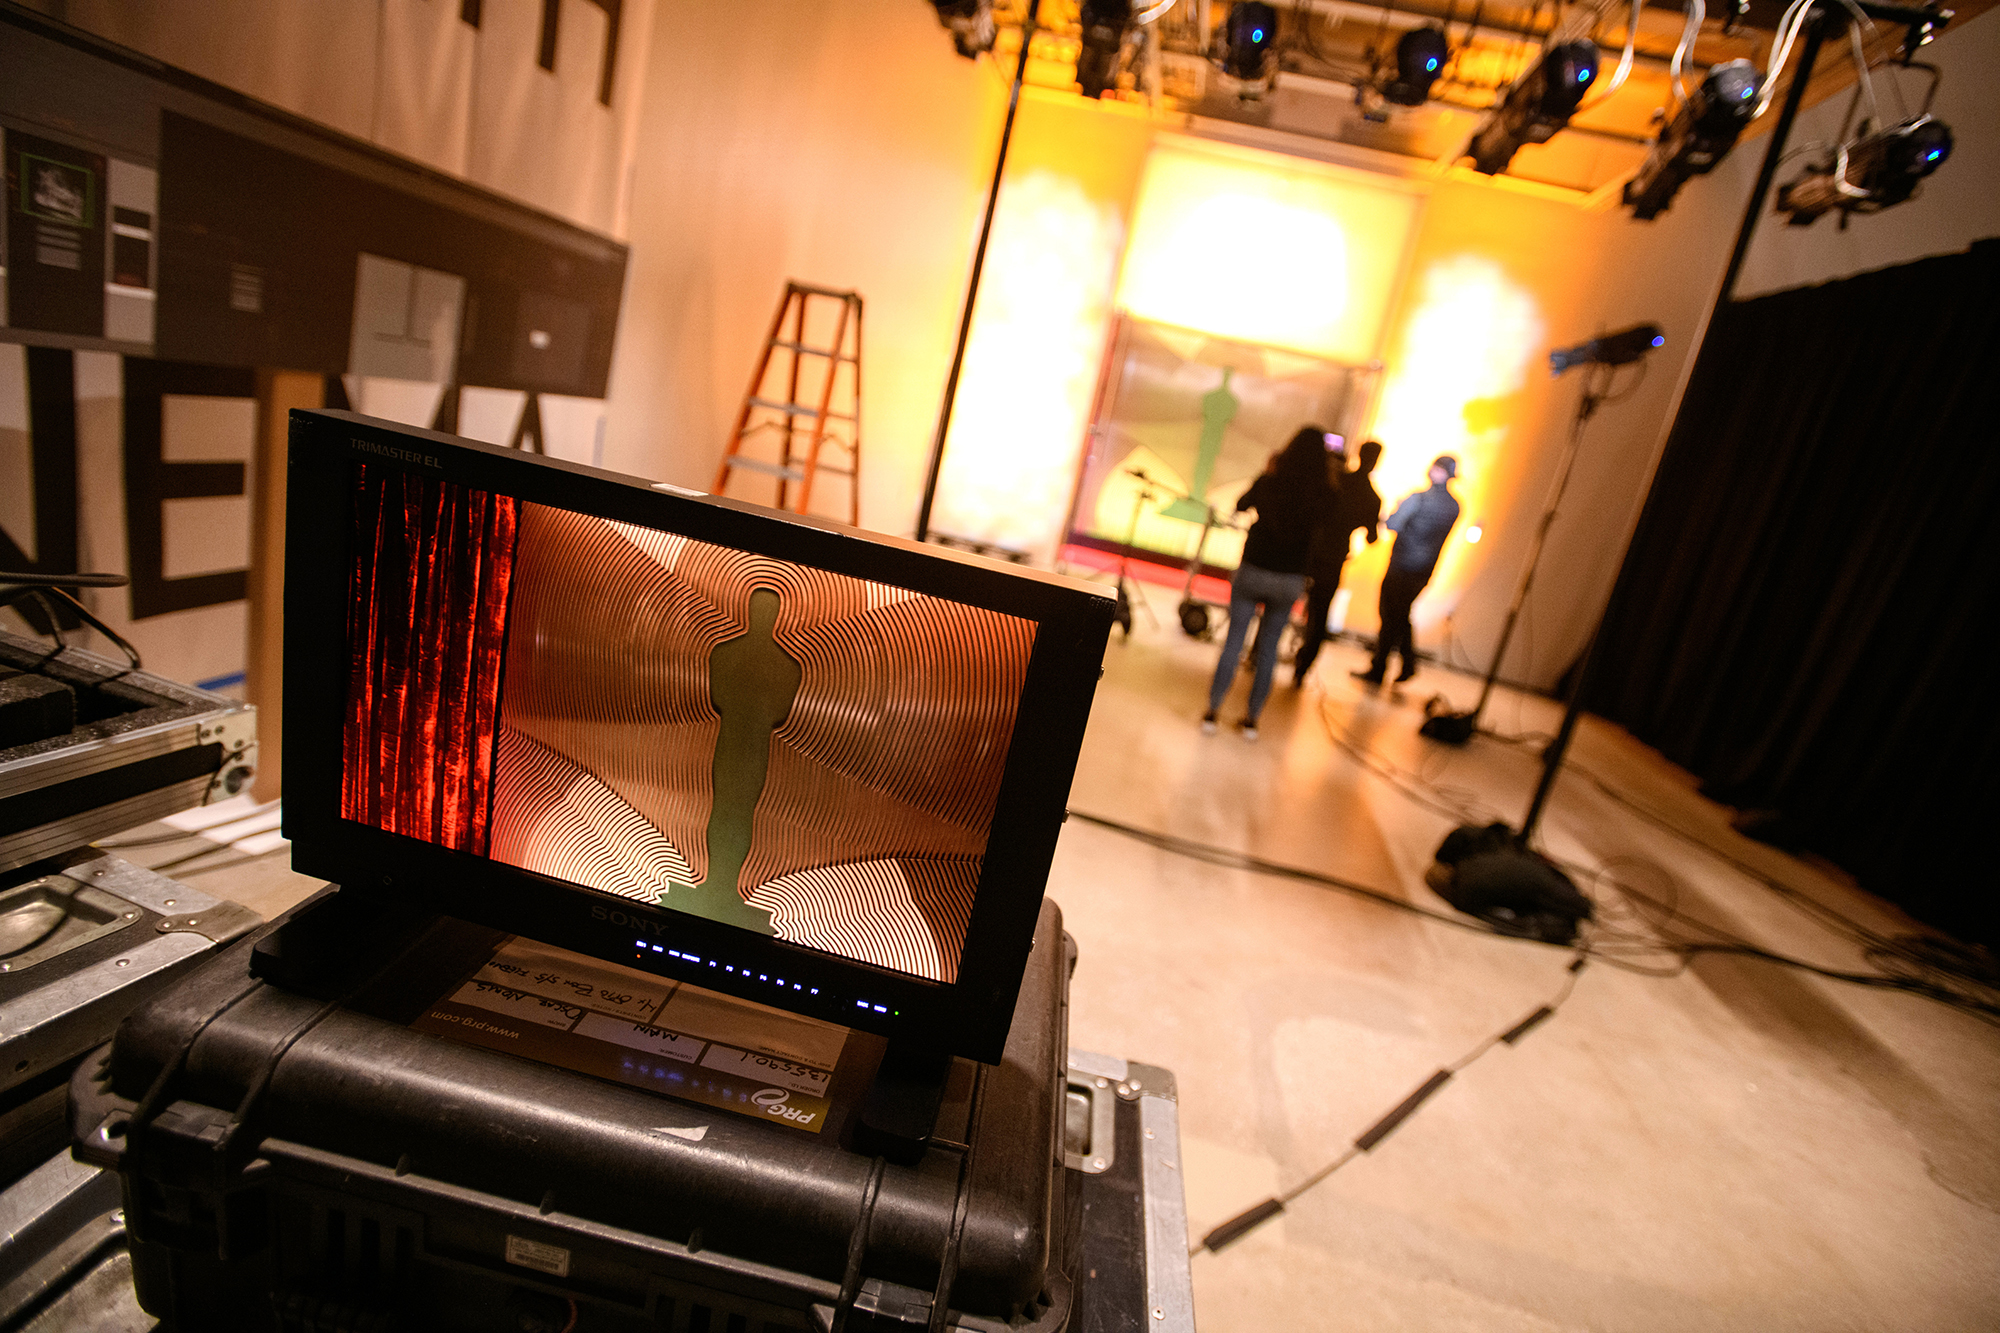 Video screen with shadow of the Oscars statue in foreground, three people in a photo studio taking photos of a screen on a wall illuminated with impact lights in background.